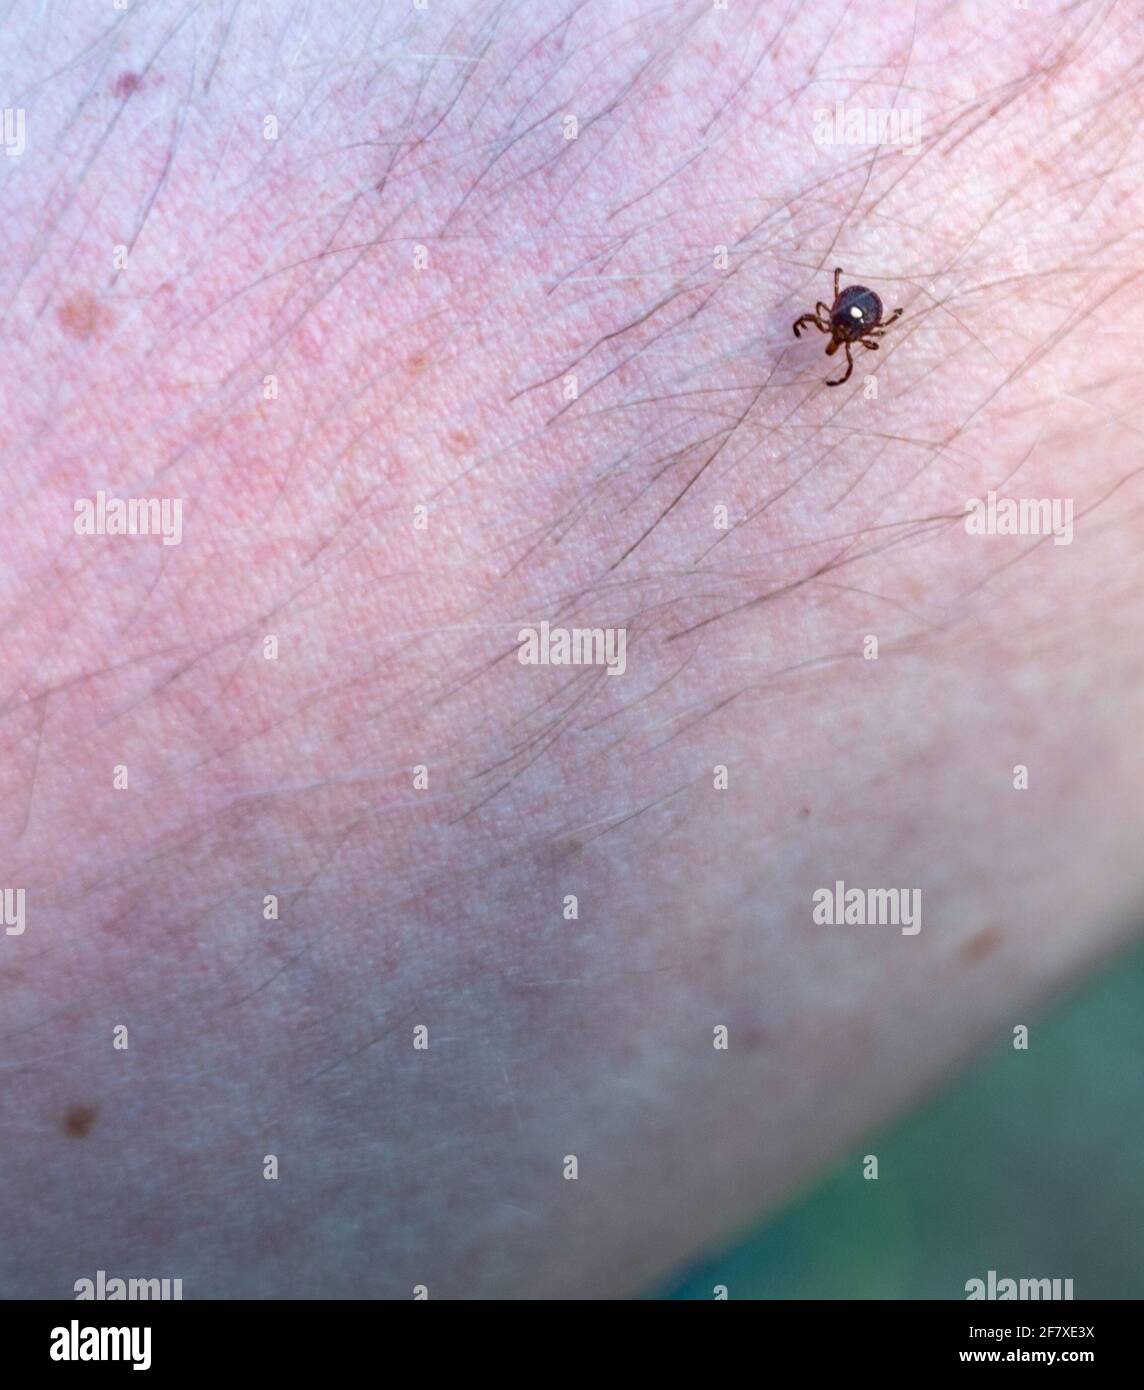 A lone star tick, a common vector of diseases, crawling on an arm Stock Photo